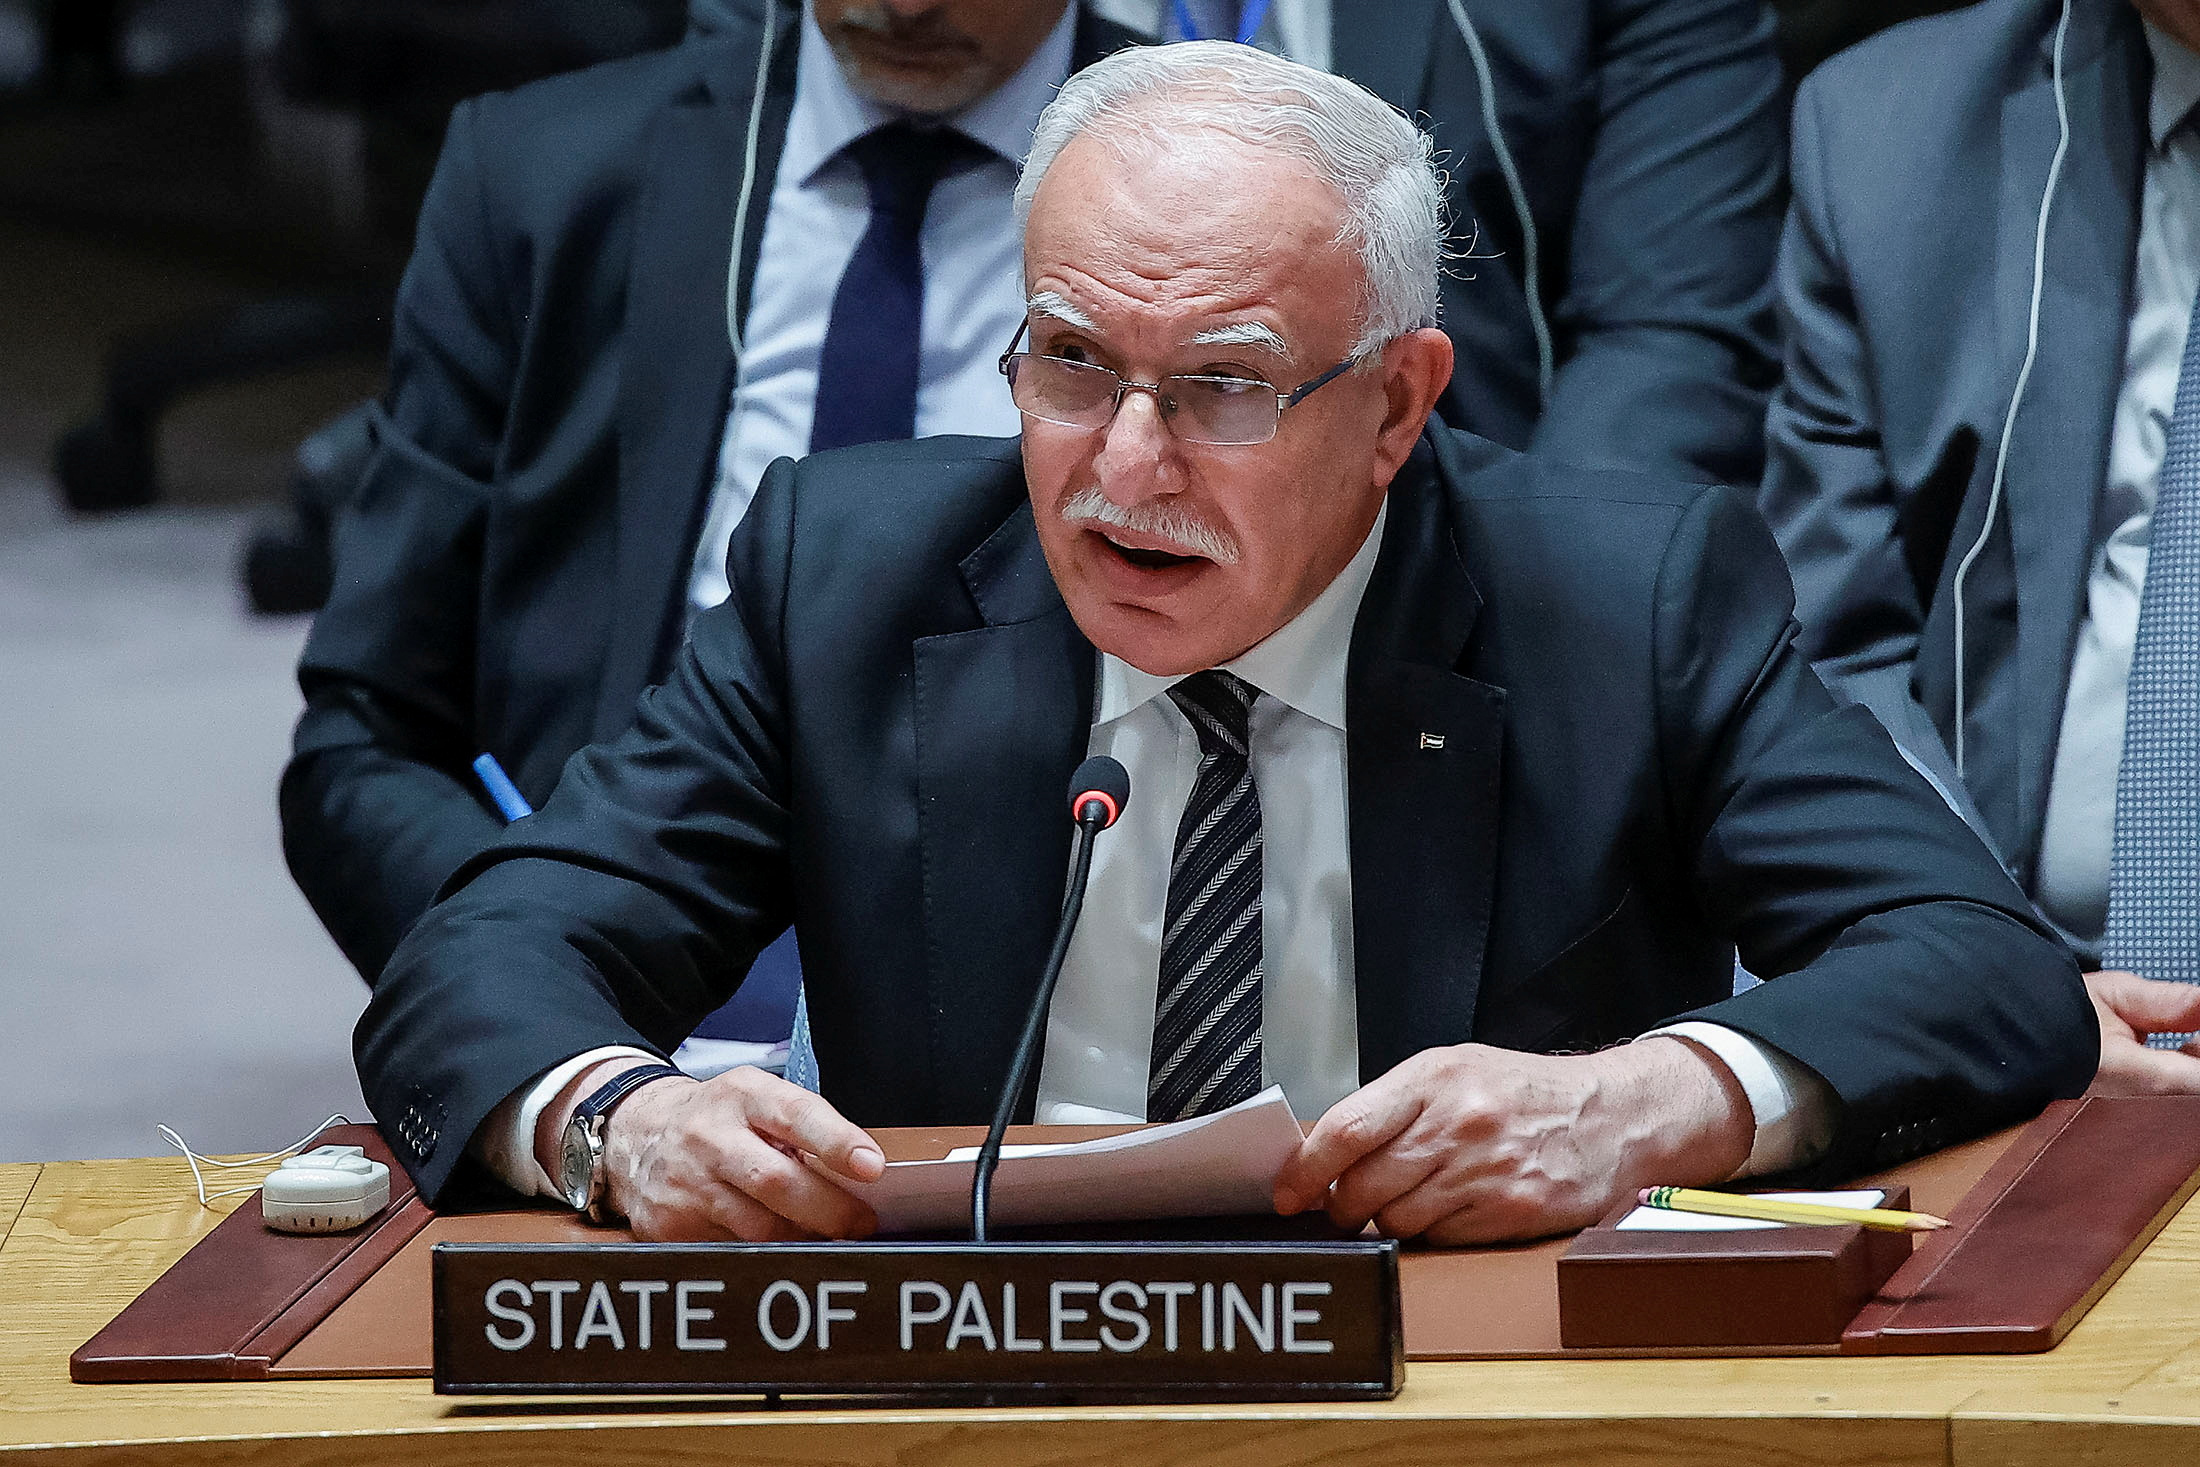 Palestinian Authority Foreign Minister Riyad al-Maliki speaks during a meeting of the United Nations Security Council on Tuesday.